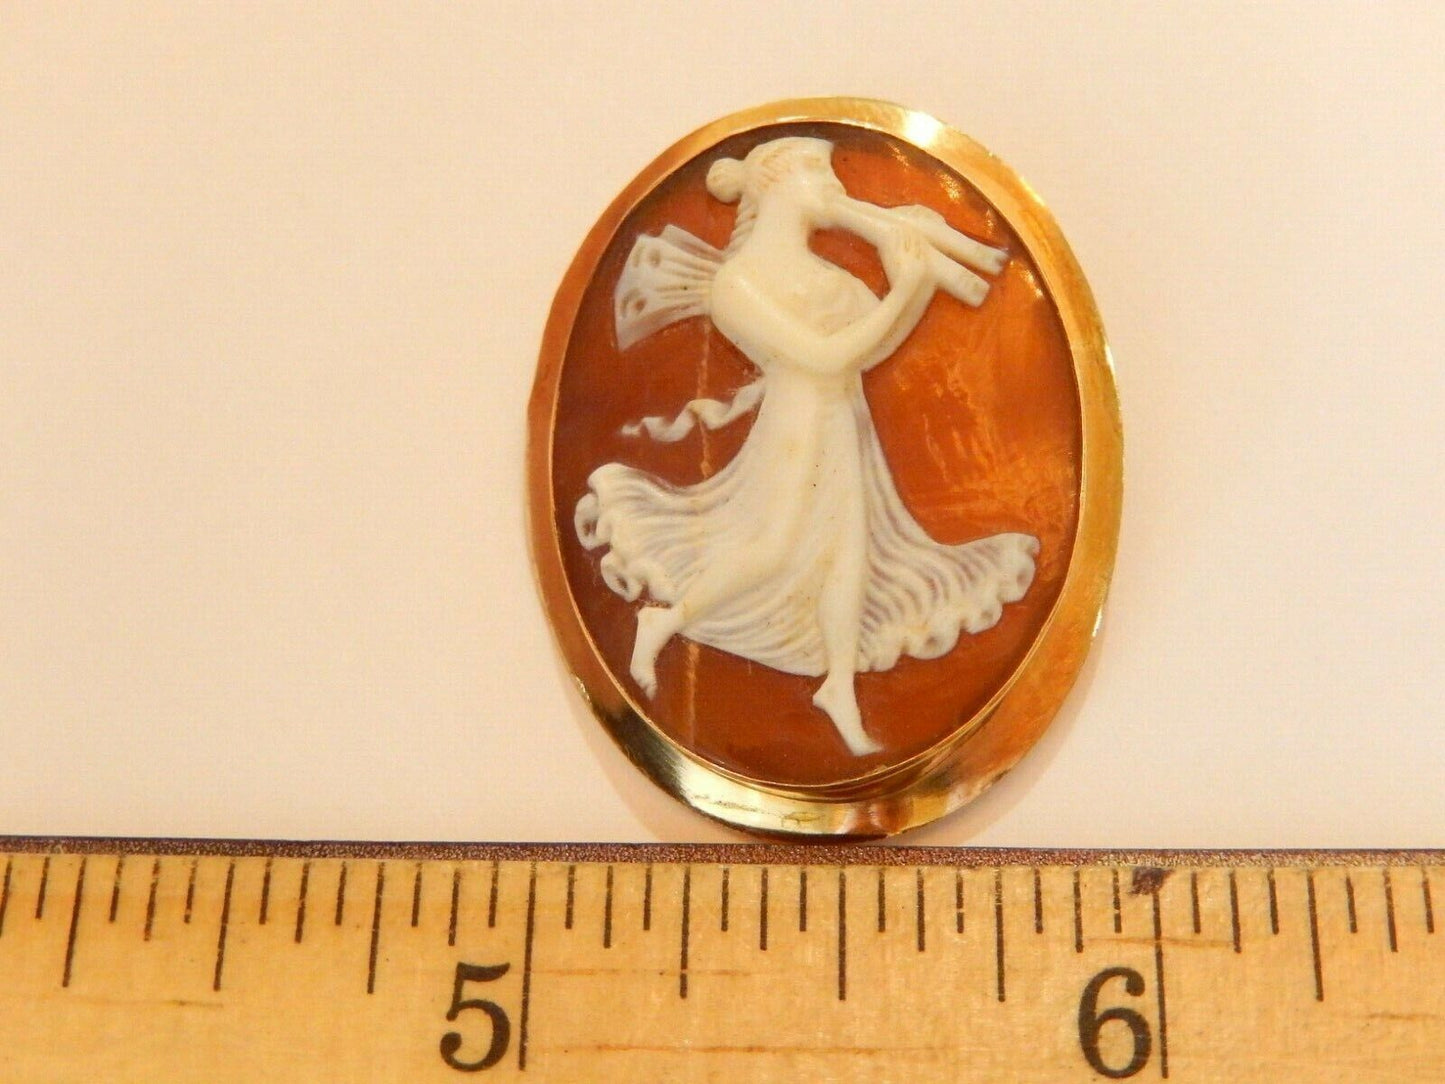 *VINTAGE* 750 18k  Solid Yellow Gold LARGE Cameo Pin Brooch Pendant 35mm x 27mm